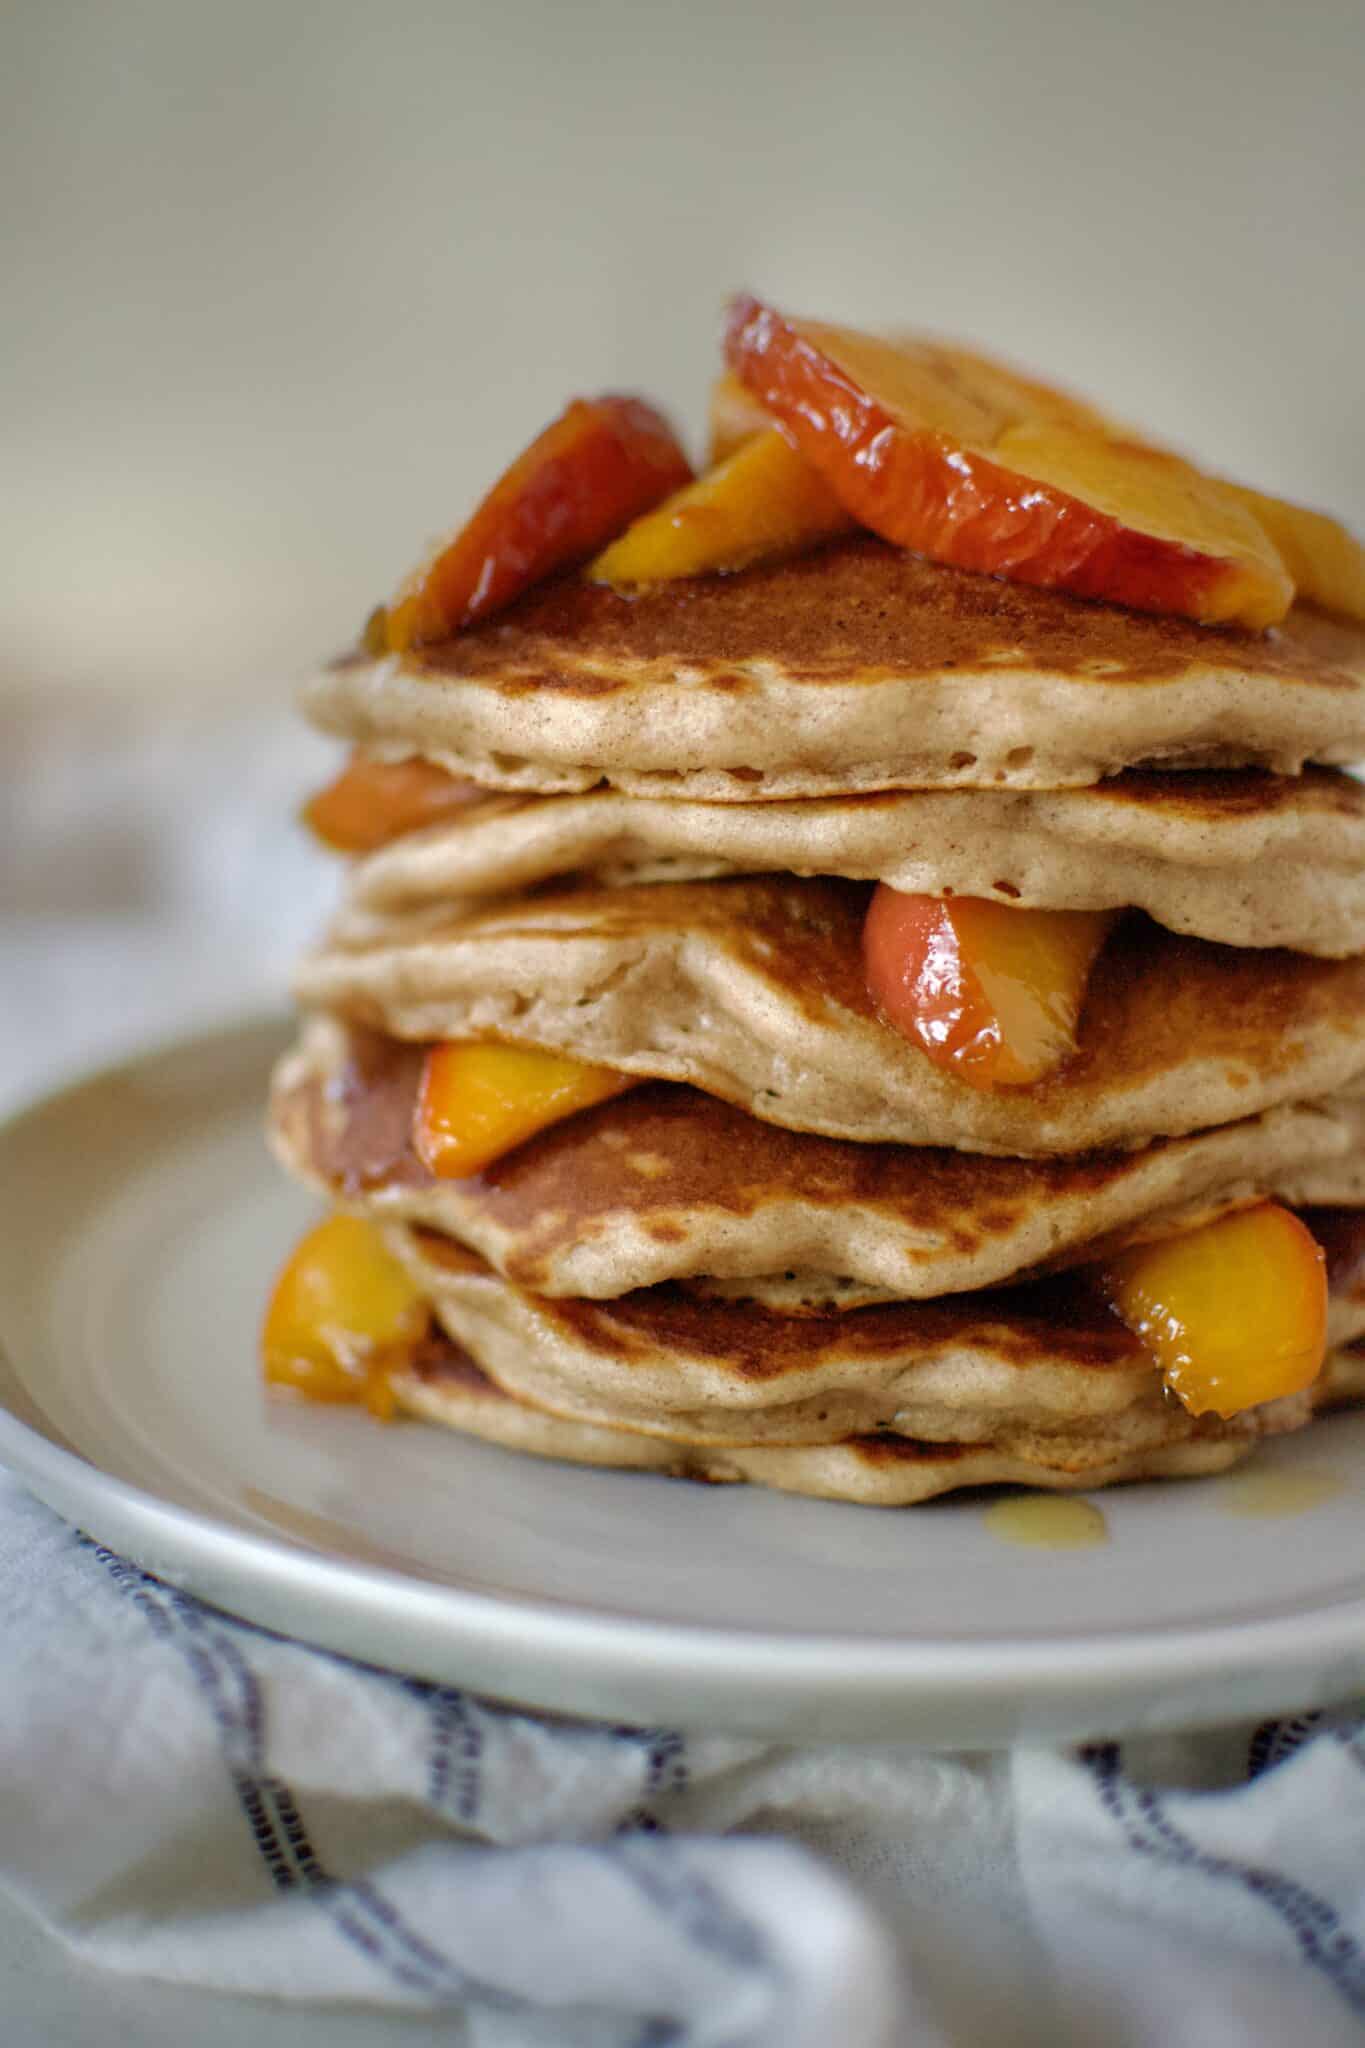 Peach Pancakes on a plate ready to eat.